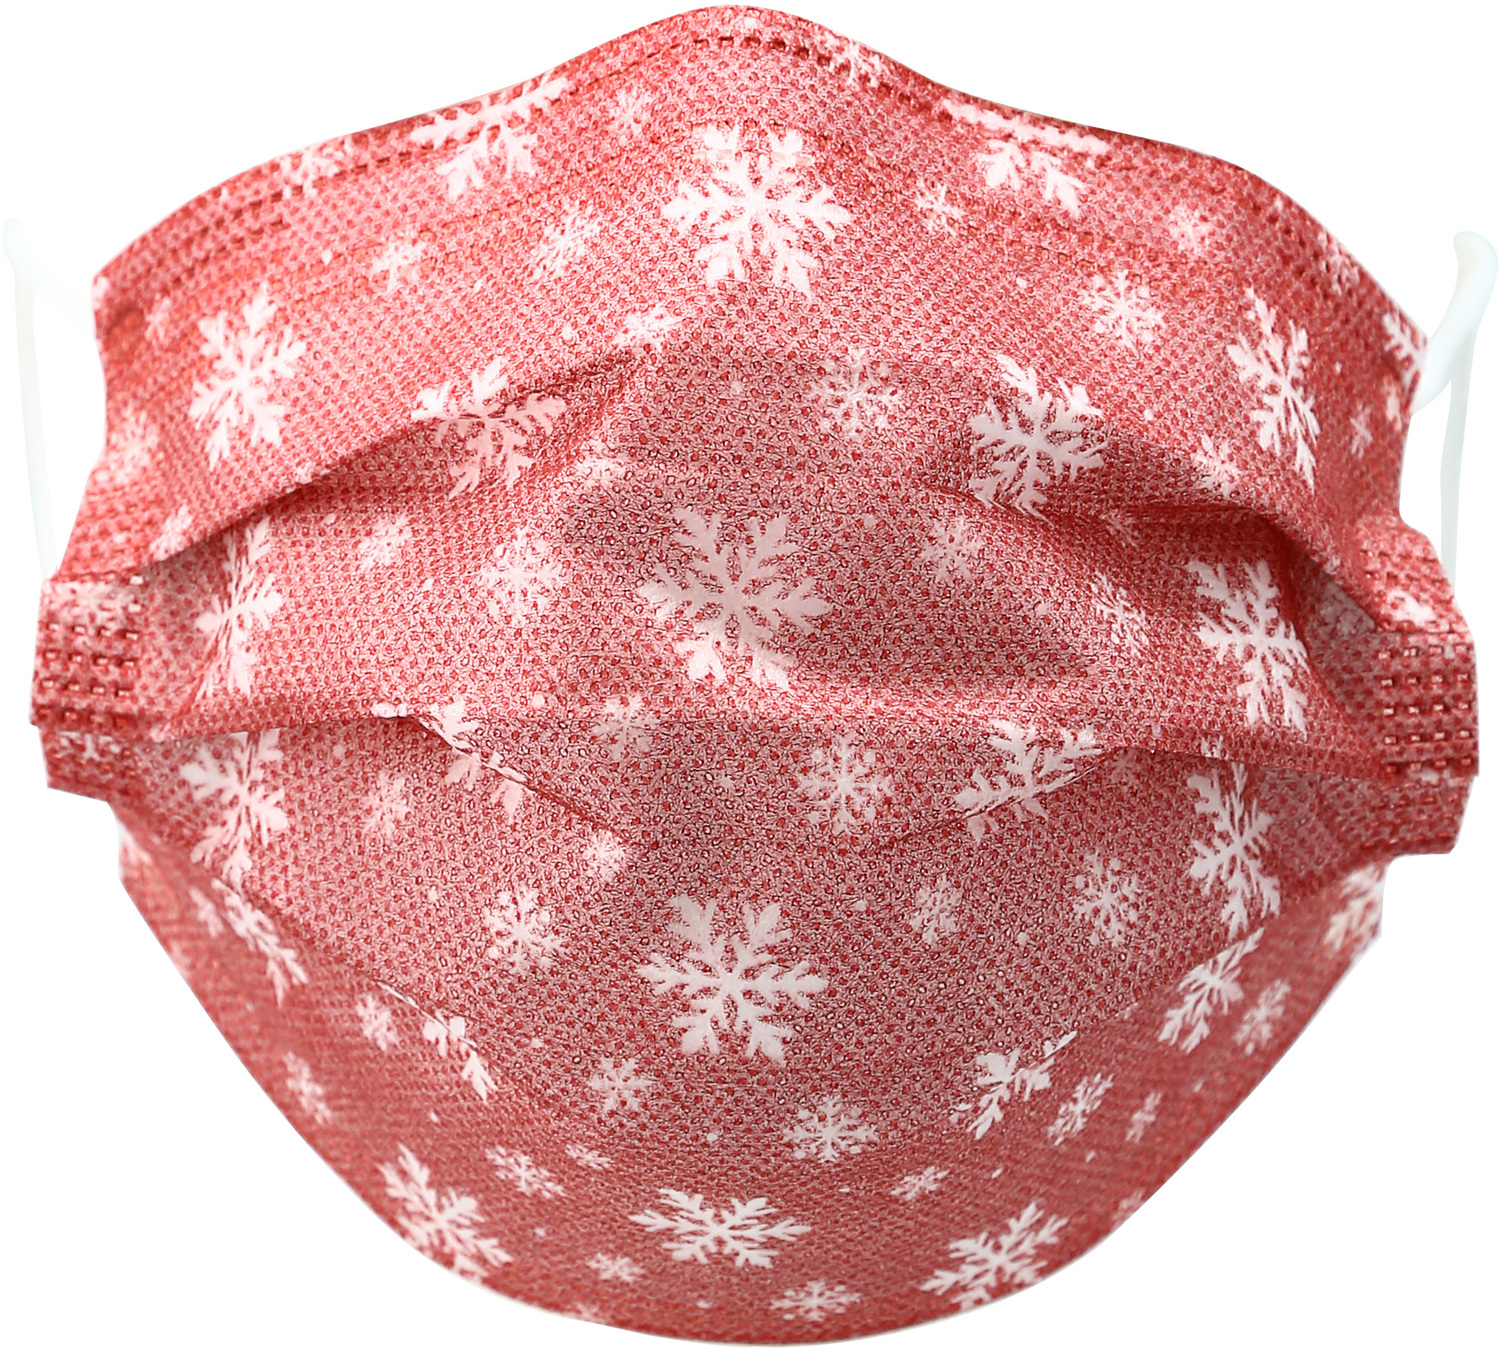 Snowflakes by Pavilion Cares - Snowflakes - Adult Disposable 3-Layer Face Mask
(Set of 7)